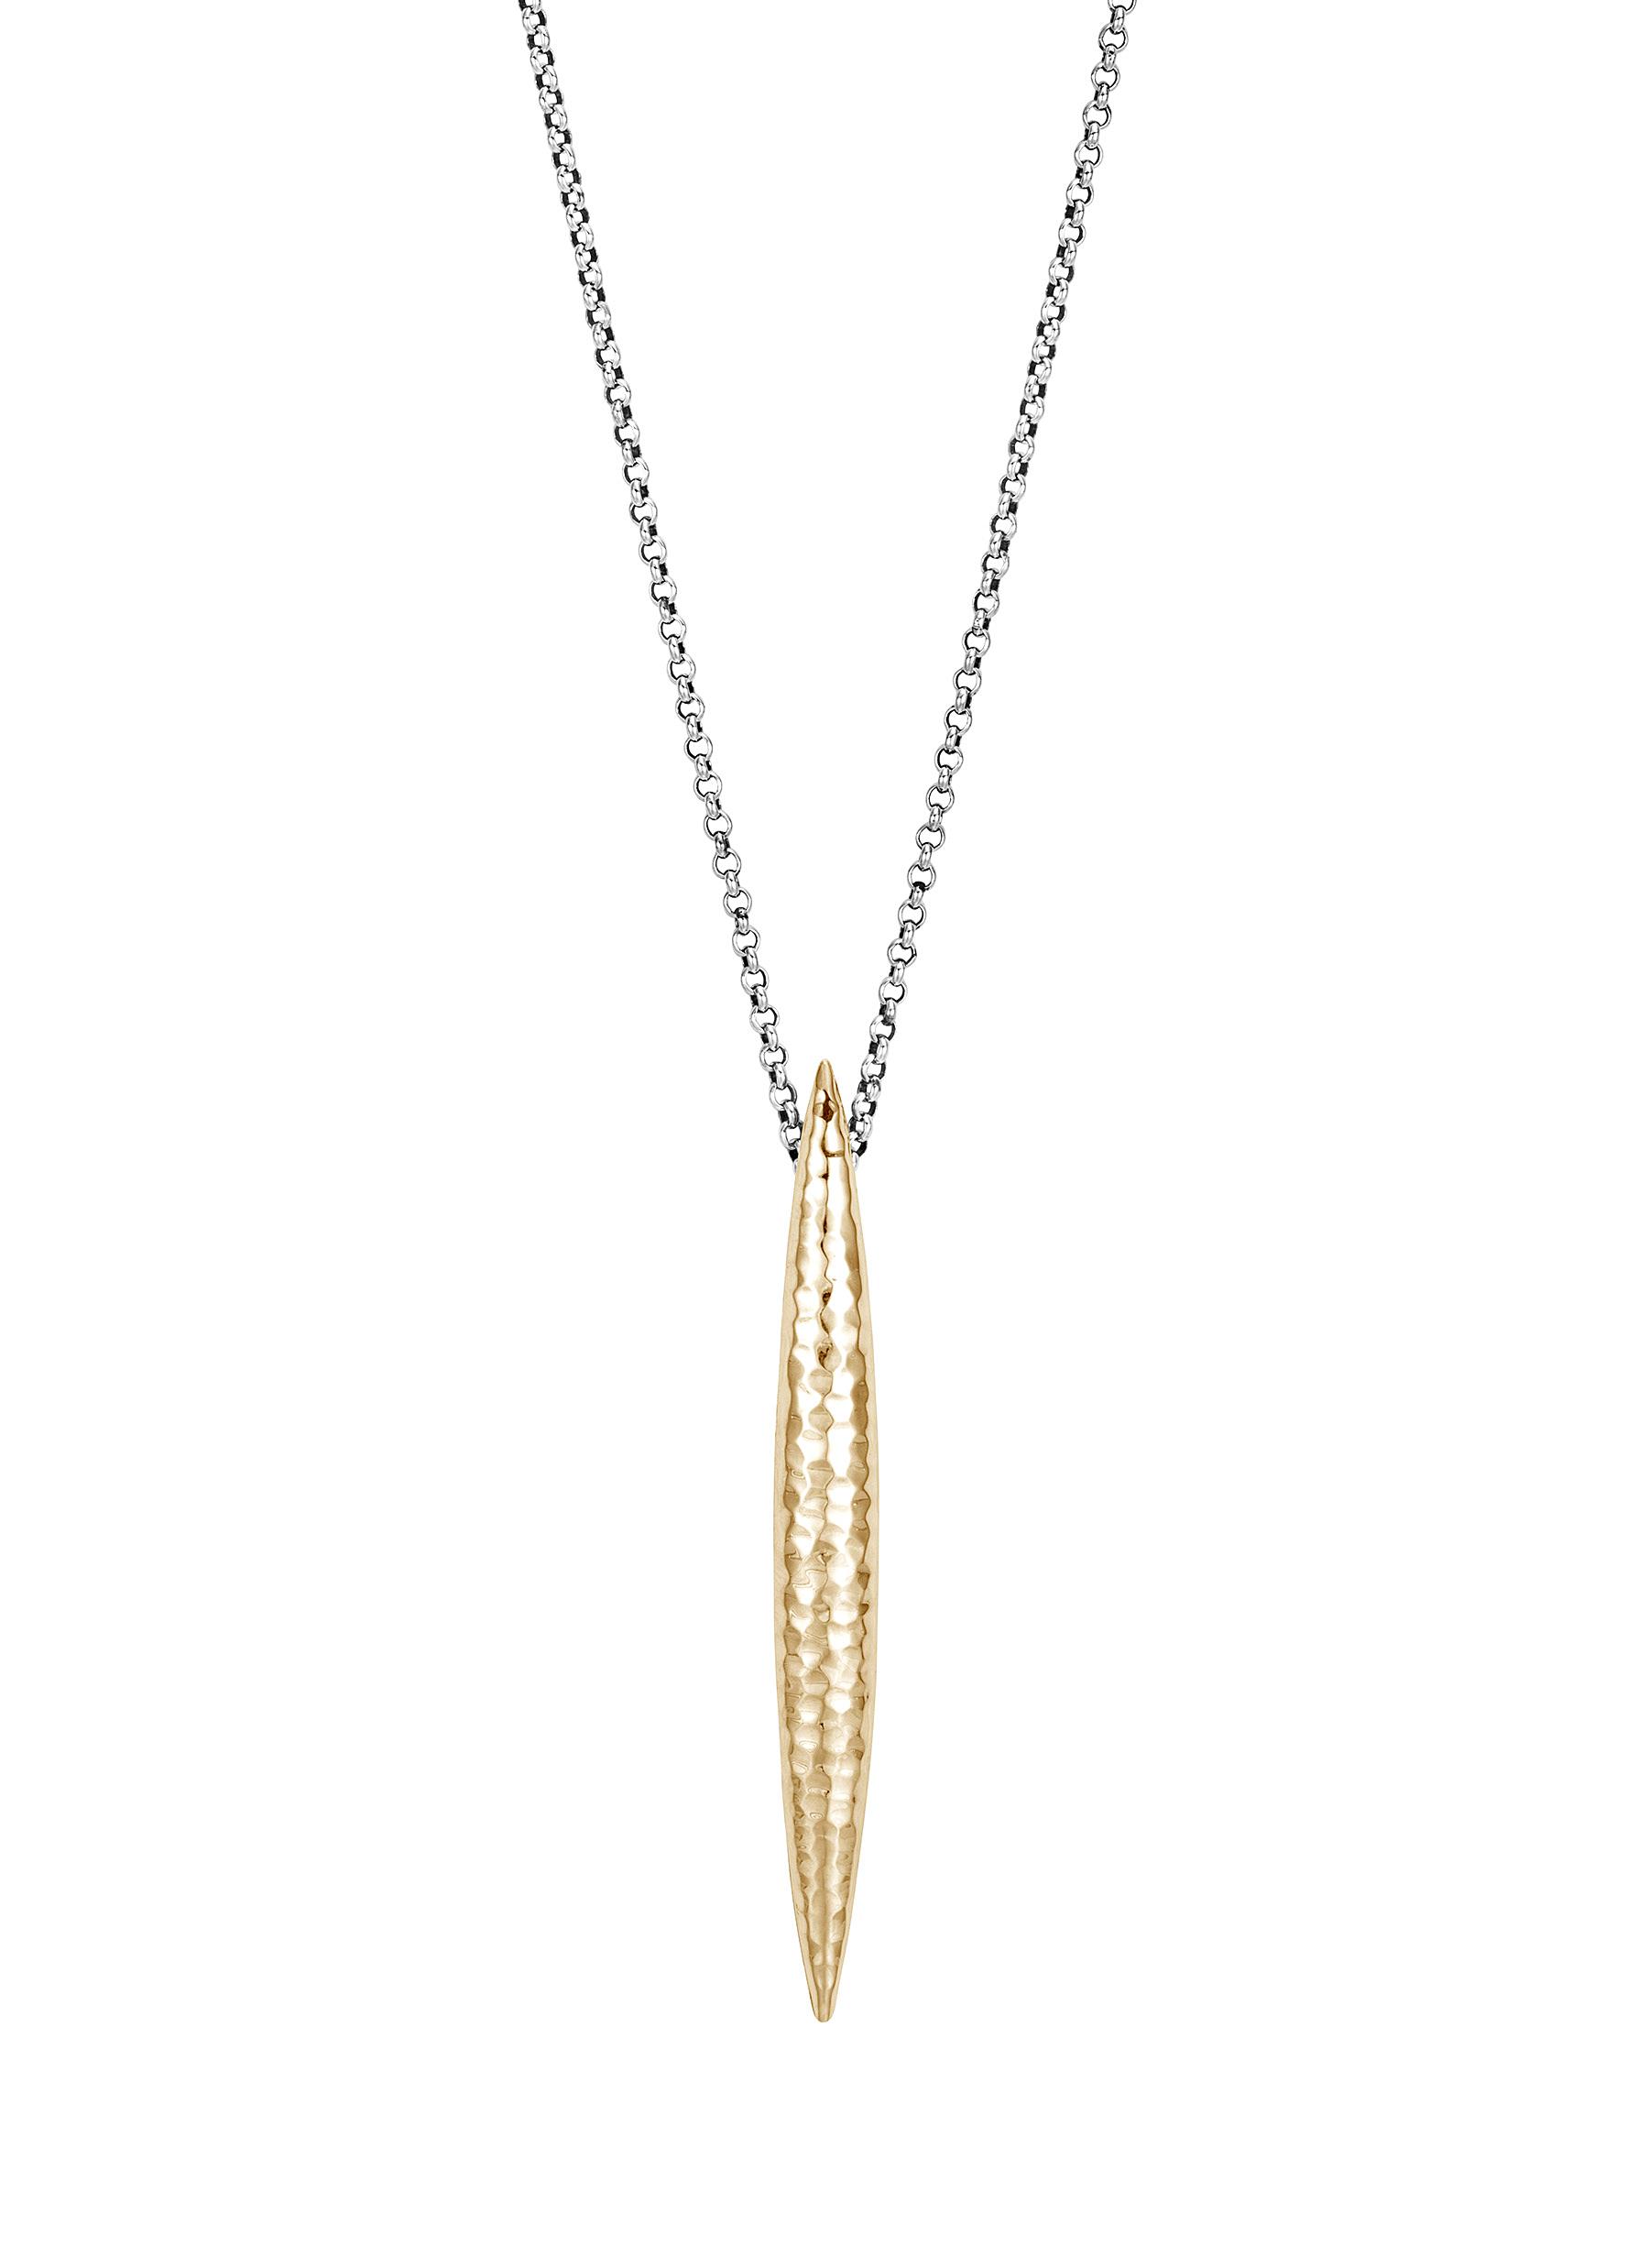 'Classic Chain' 18k gold silver spear pendant necklace